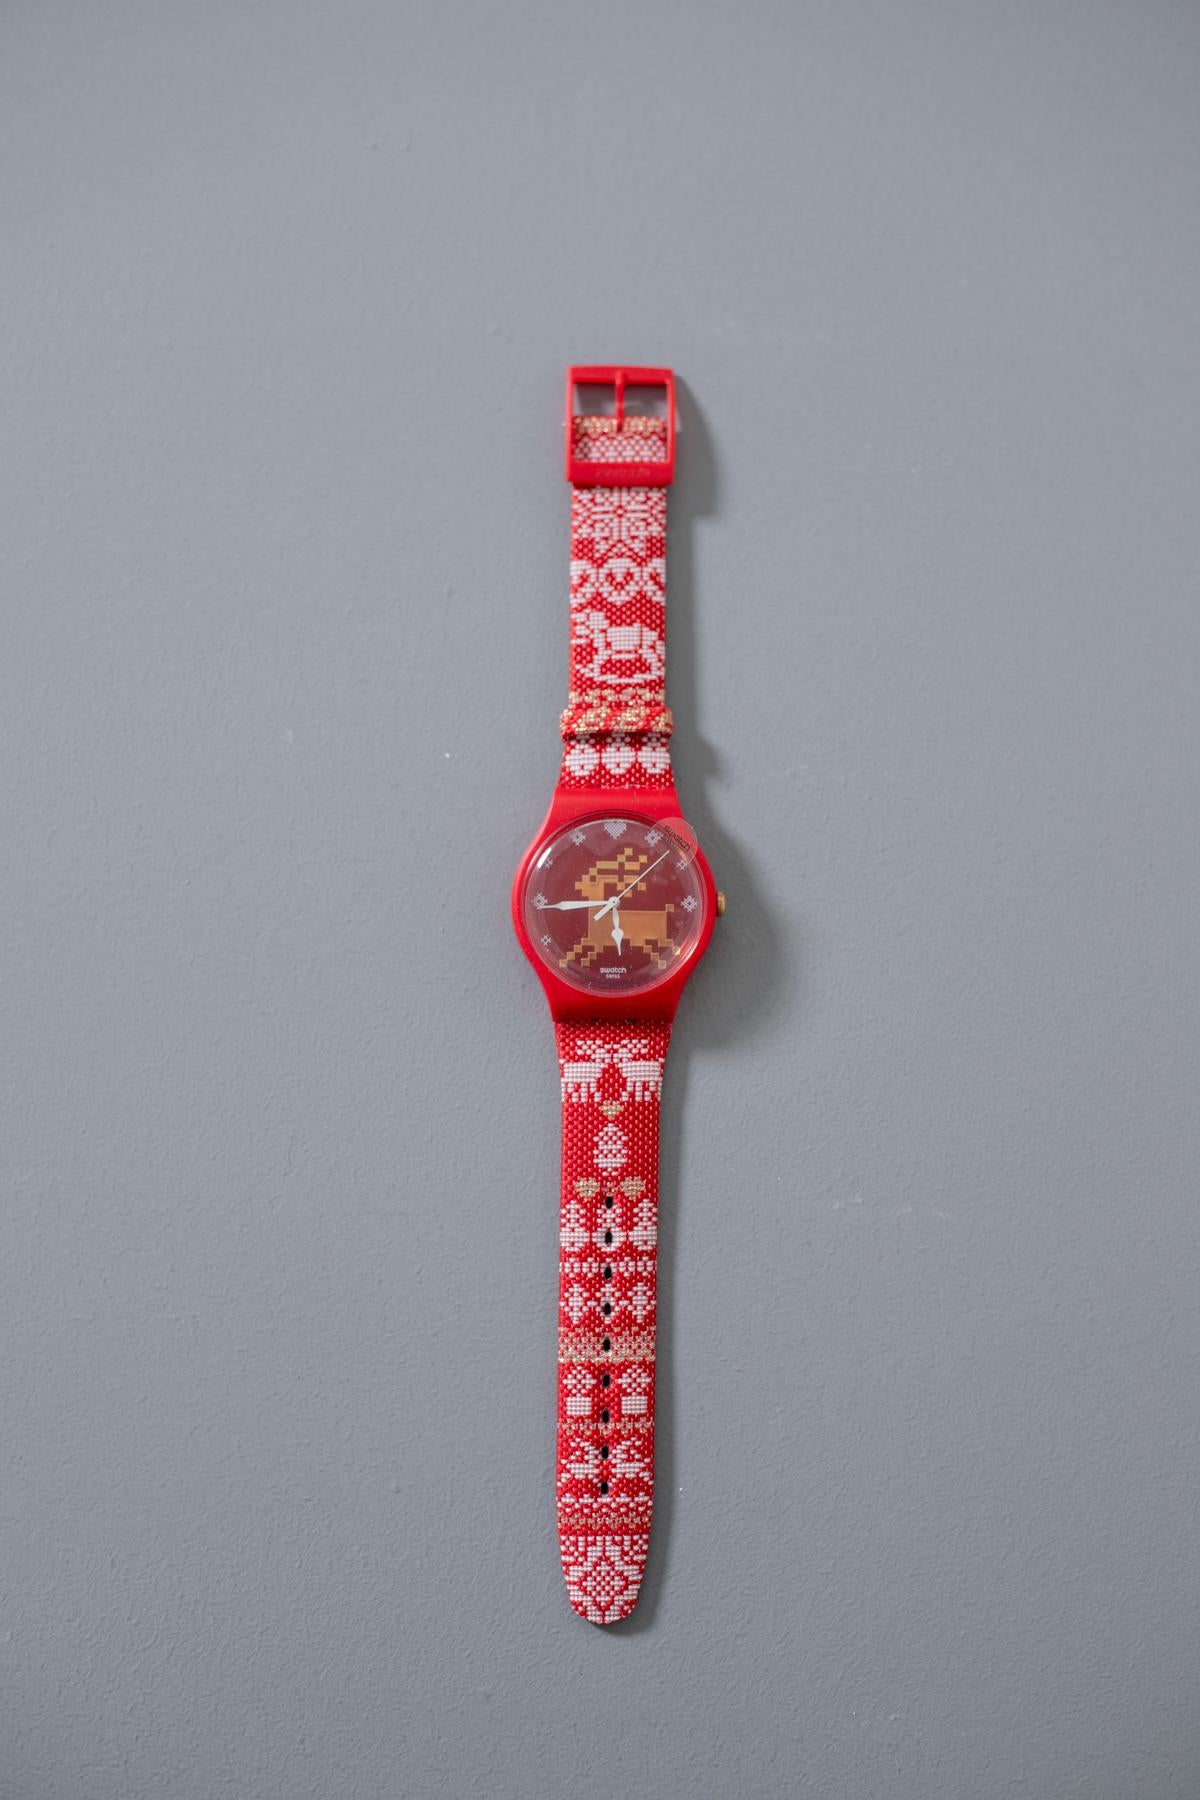 Swatch Red Knit Limited Edition For Christmas 2013 In Good Condition For Sale In Milano, IT